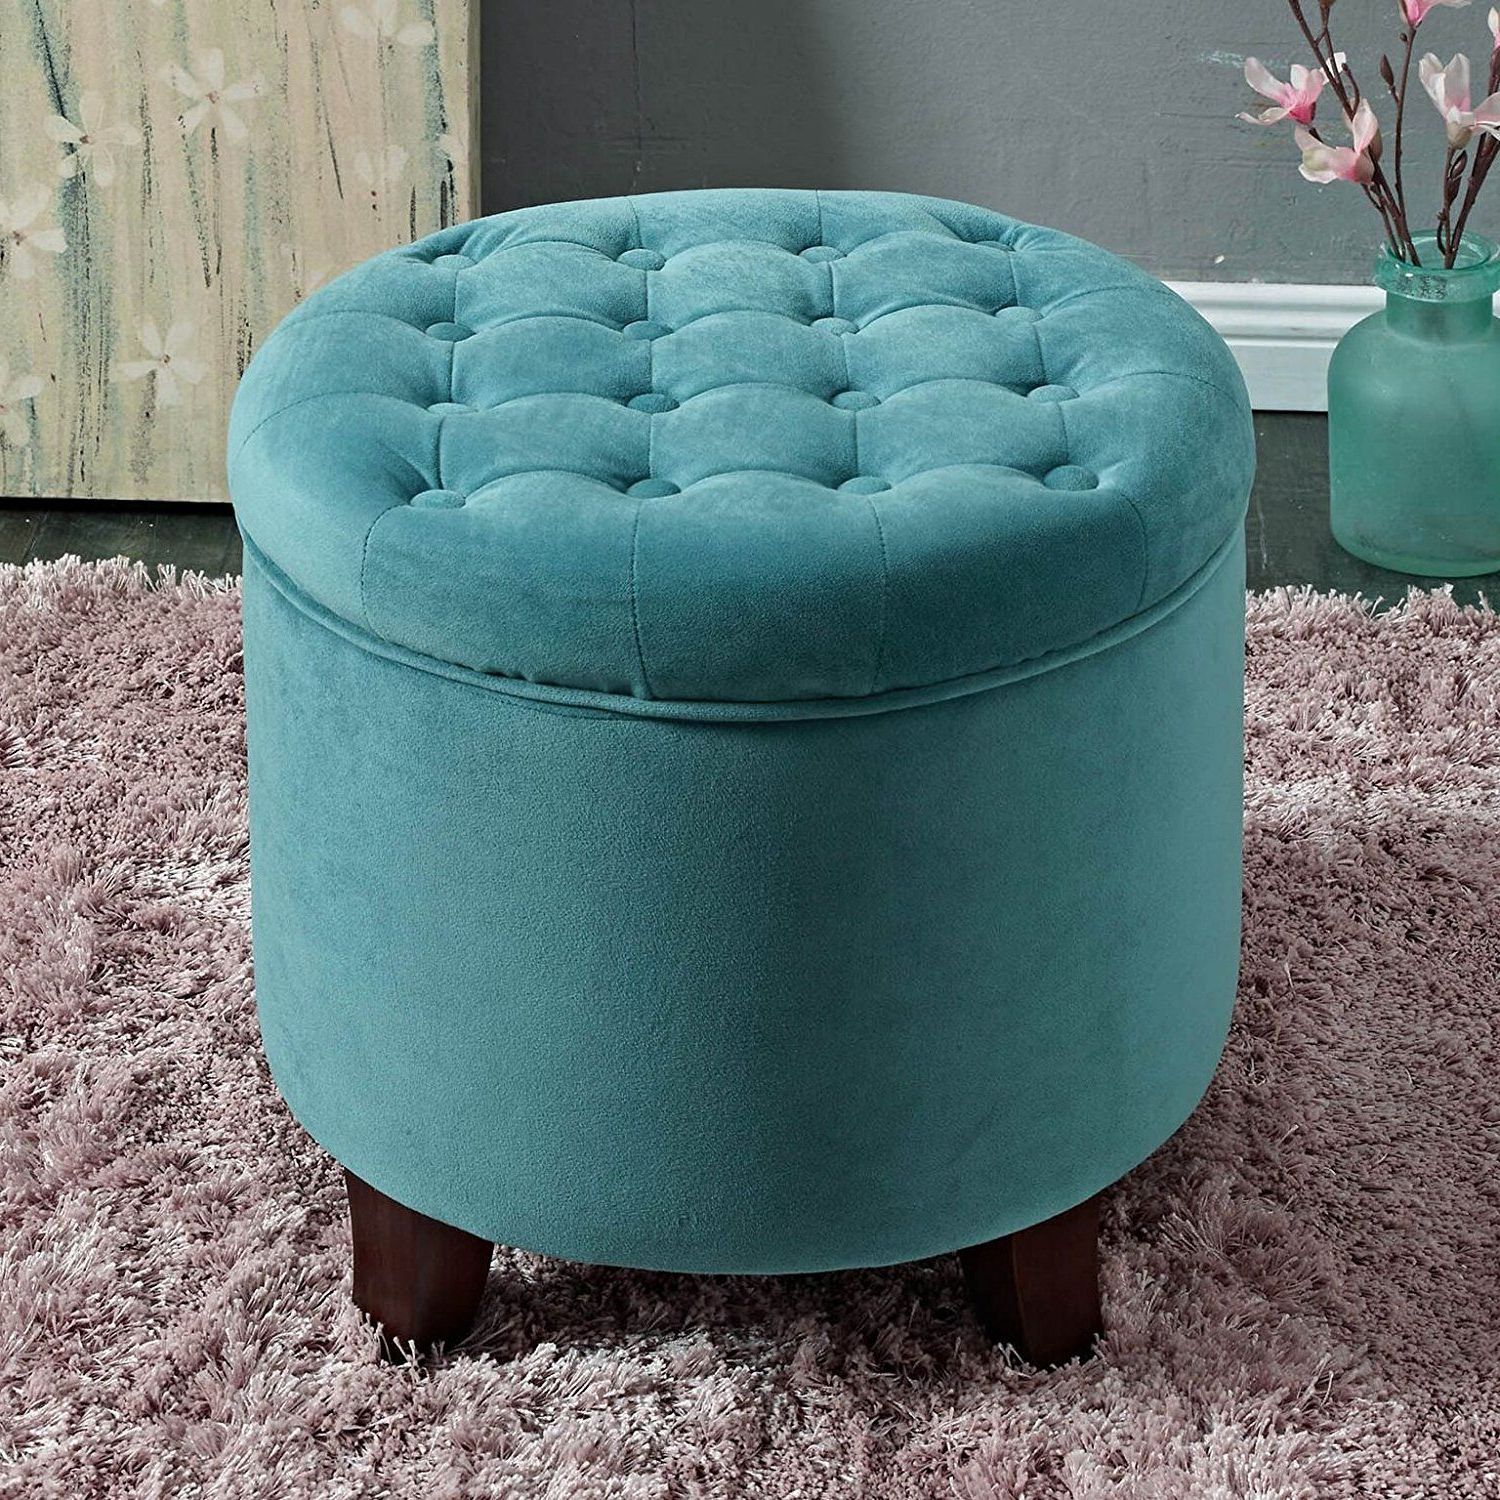 Brown Fabric Tufted Surfboard Ottomans With Regard To Most Recently Released Amazon: Kinfine Velvet Tufted Round Storage Ottoman With Removable (View 10 of 10)